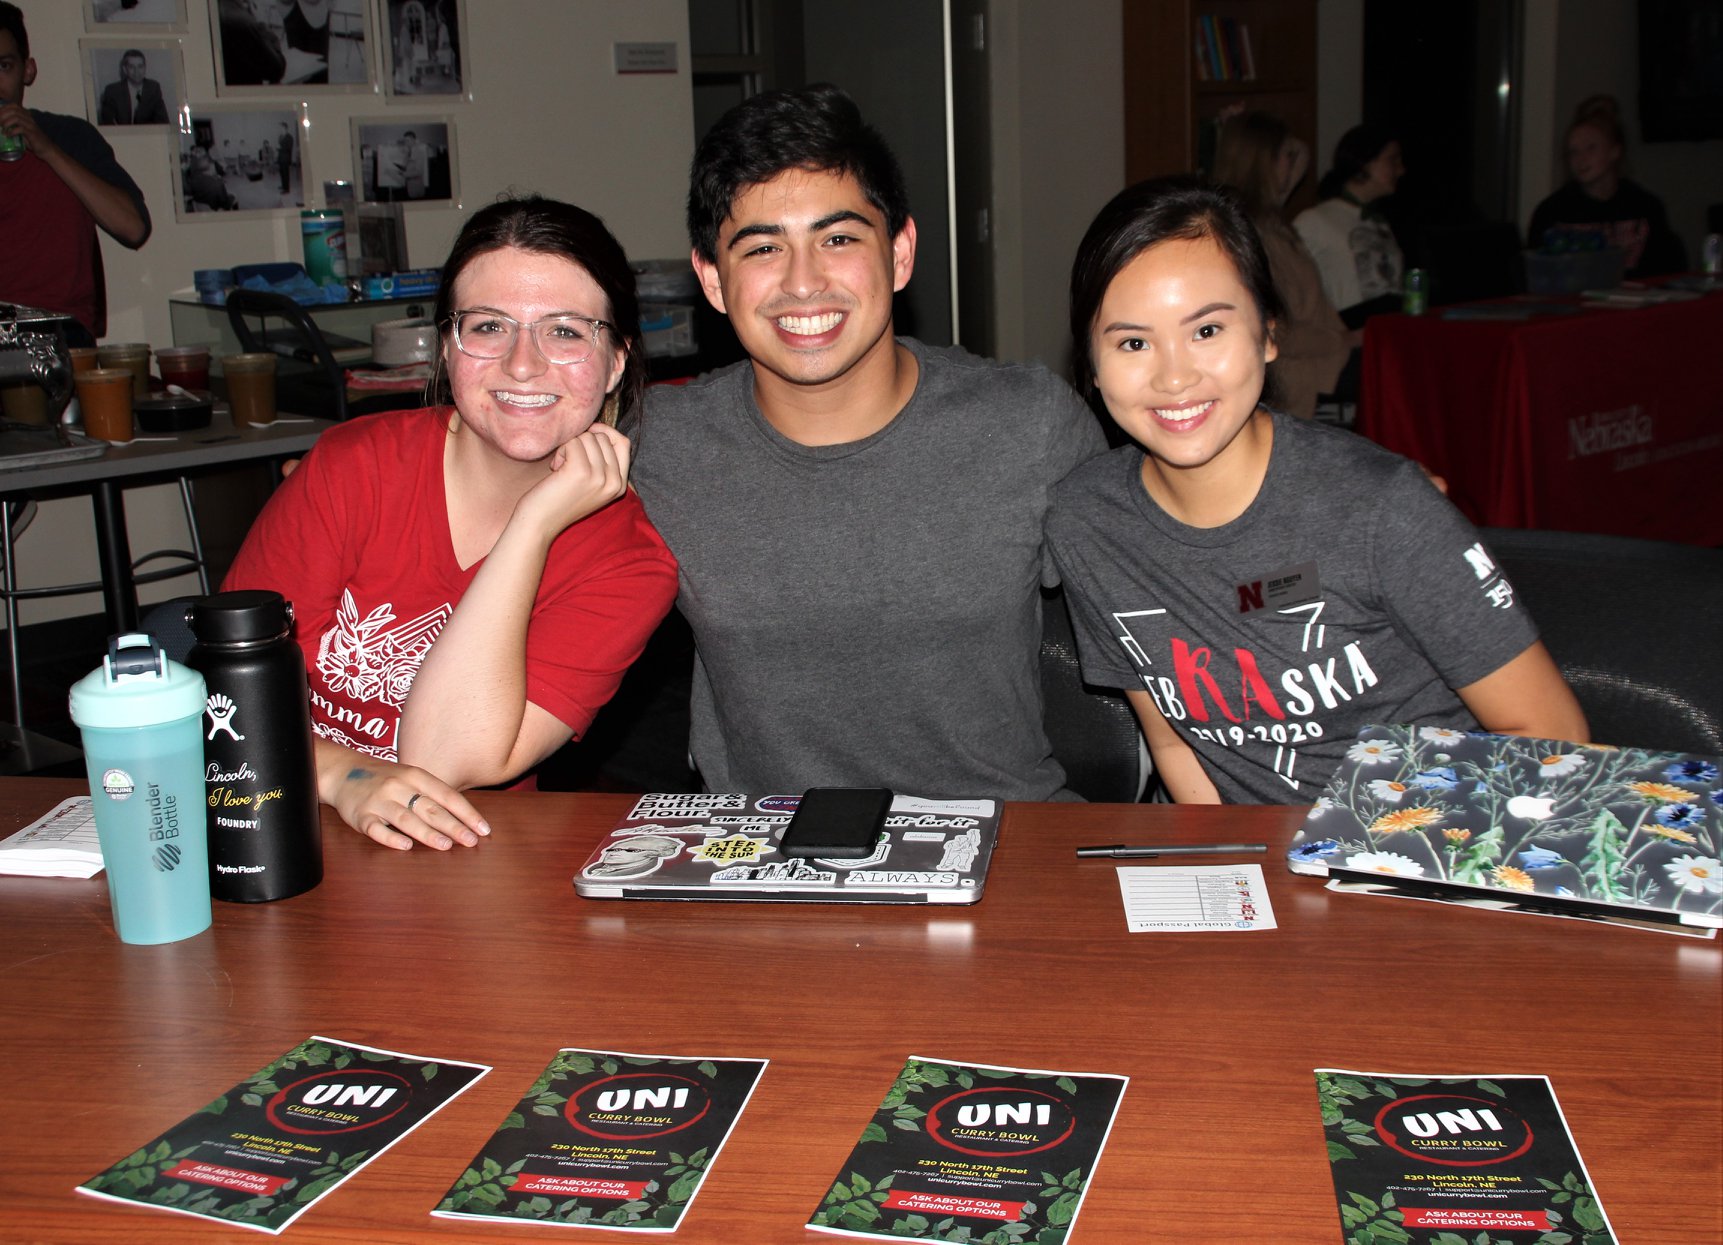 Meet new friends and build your community in RHA.